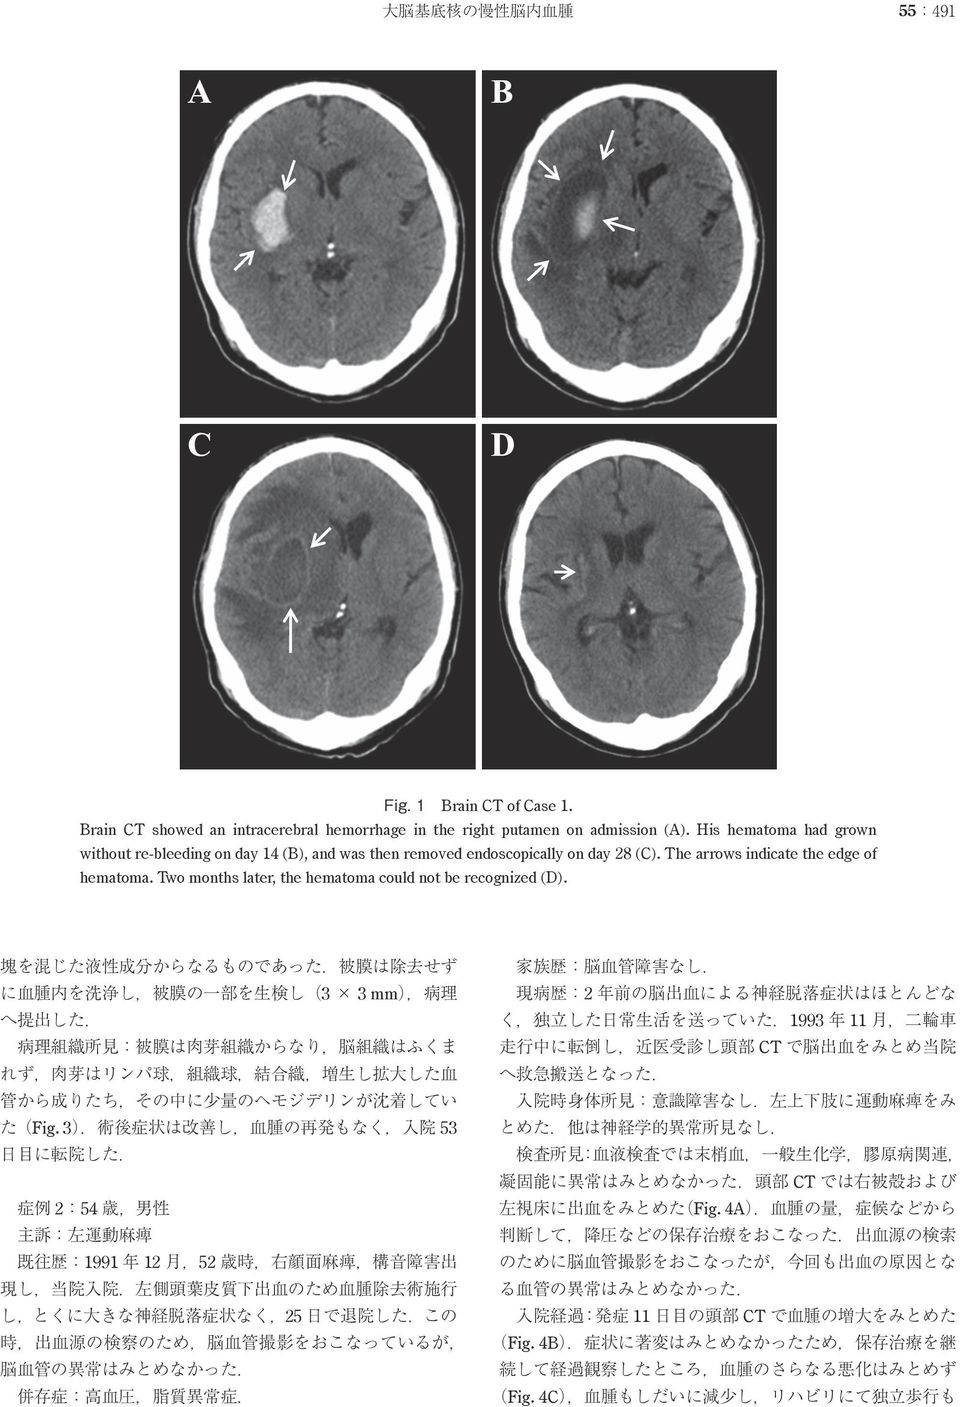 Two months later, the hematoma could not be recognized (D). 塊 を 混 じた 液 性 成 分 からなるものであった. 被 膜 は 除 去 せず に 血 腫 内 を 洗 浄 し, 被 膜 の 一 部 を 生 検 し(3 3 mm), 病 理 へ 提 出 した.